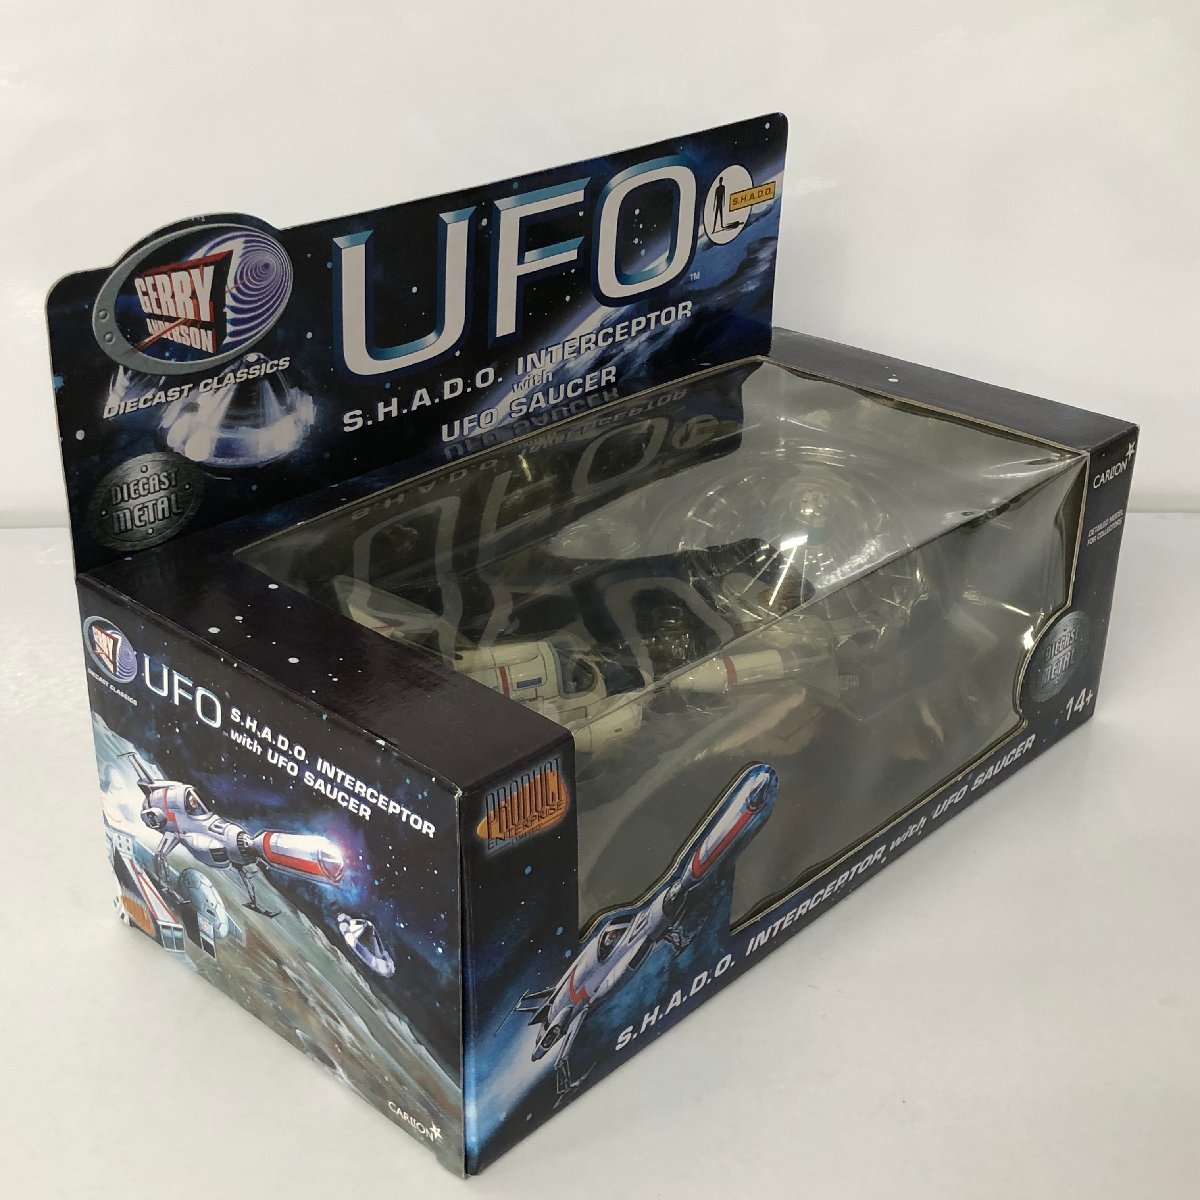 S.H.A.D.O. INTERCEPTOR with UFO SAUCER 「謎の円盤 UFO」 フィギュア　GERRY ANDERSON UFO　CARLTON_画像10